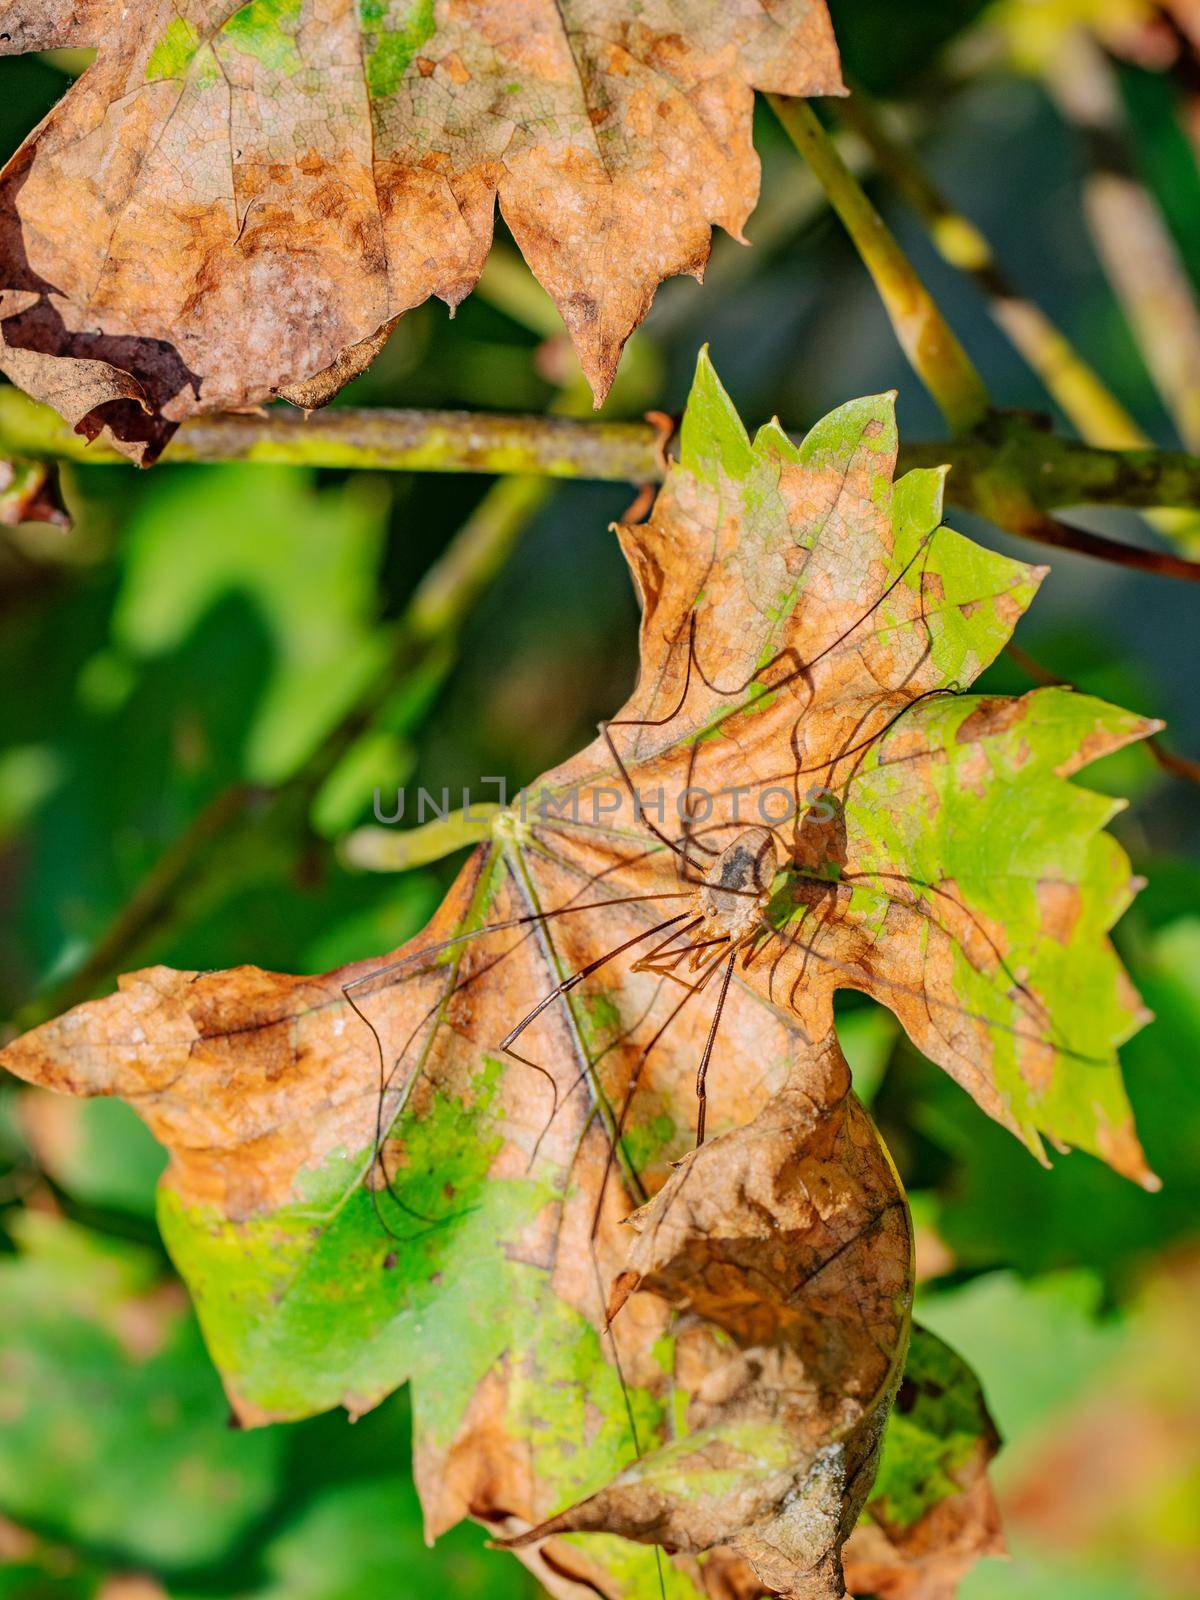 Dry vine leaf and a vine grape. Protection of the vineyard by rdonar2